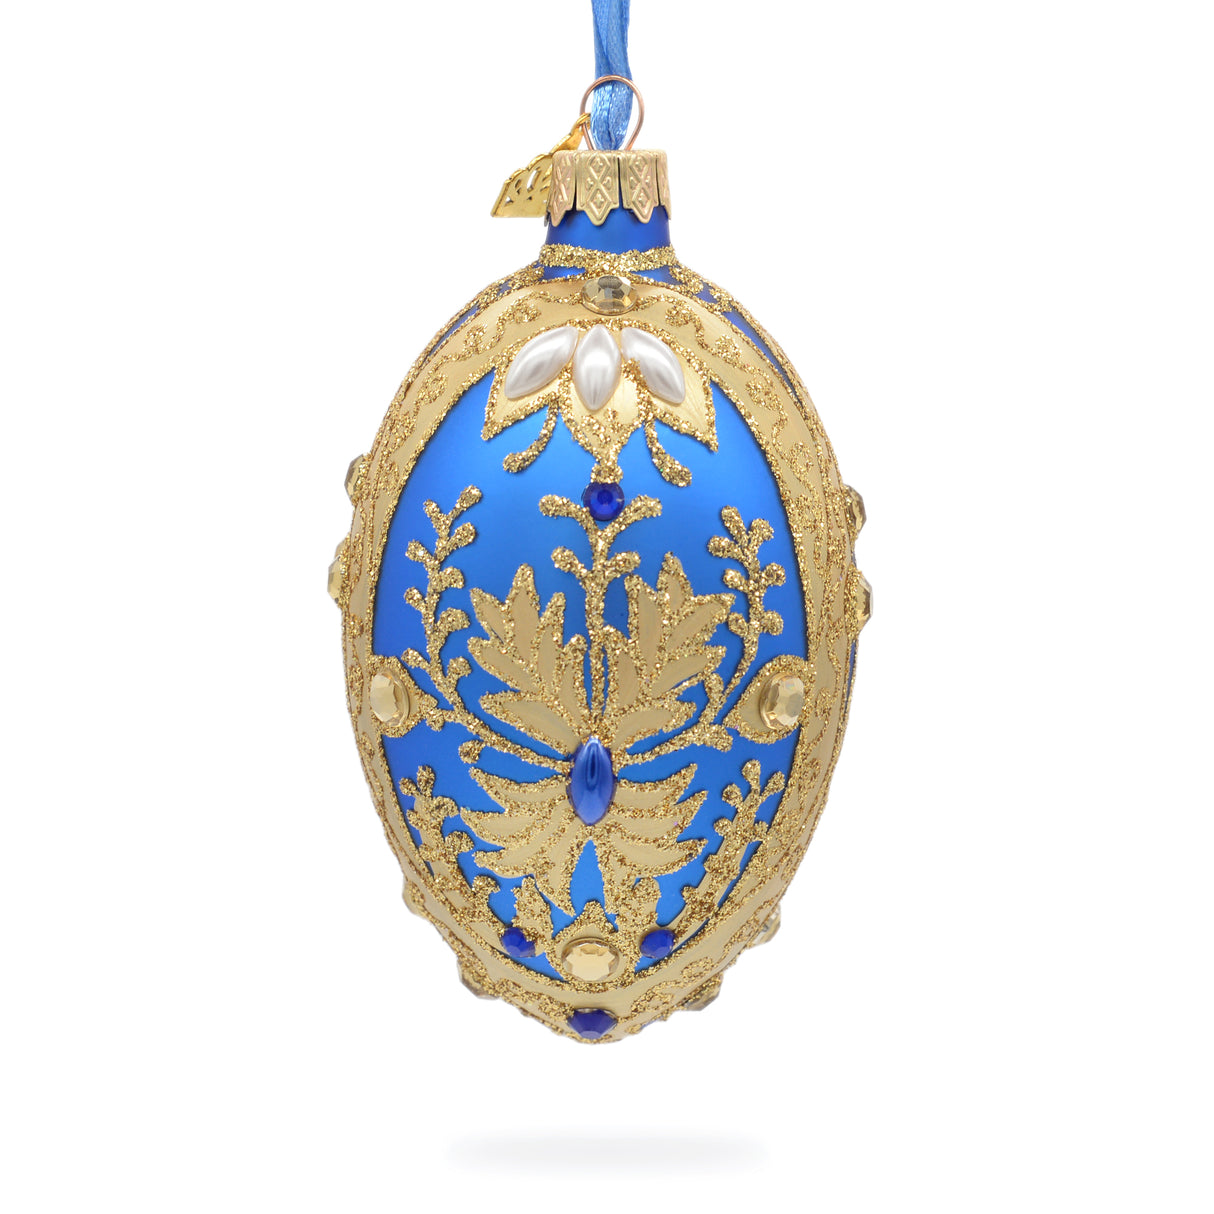 Golden Swirls on Blue Glass Egg Ornament 4 Inches in Blue color, Oval shape